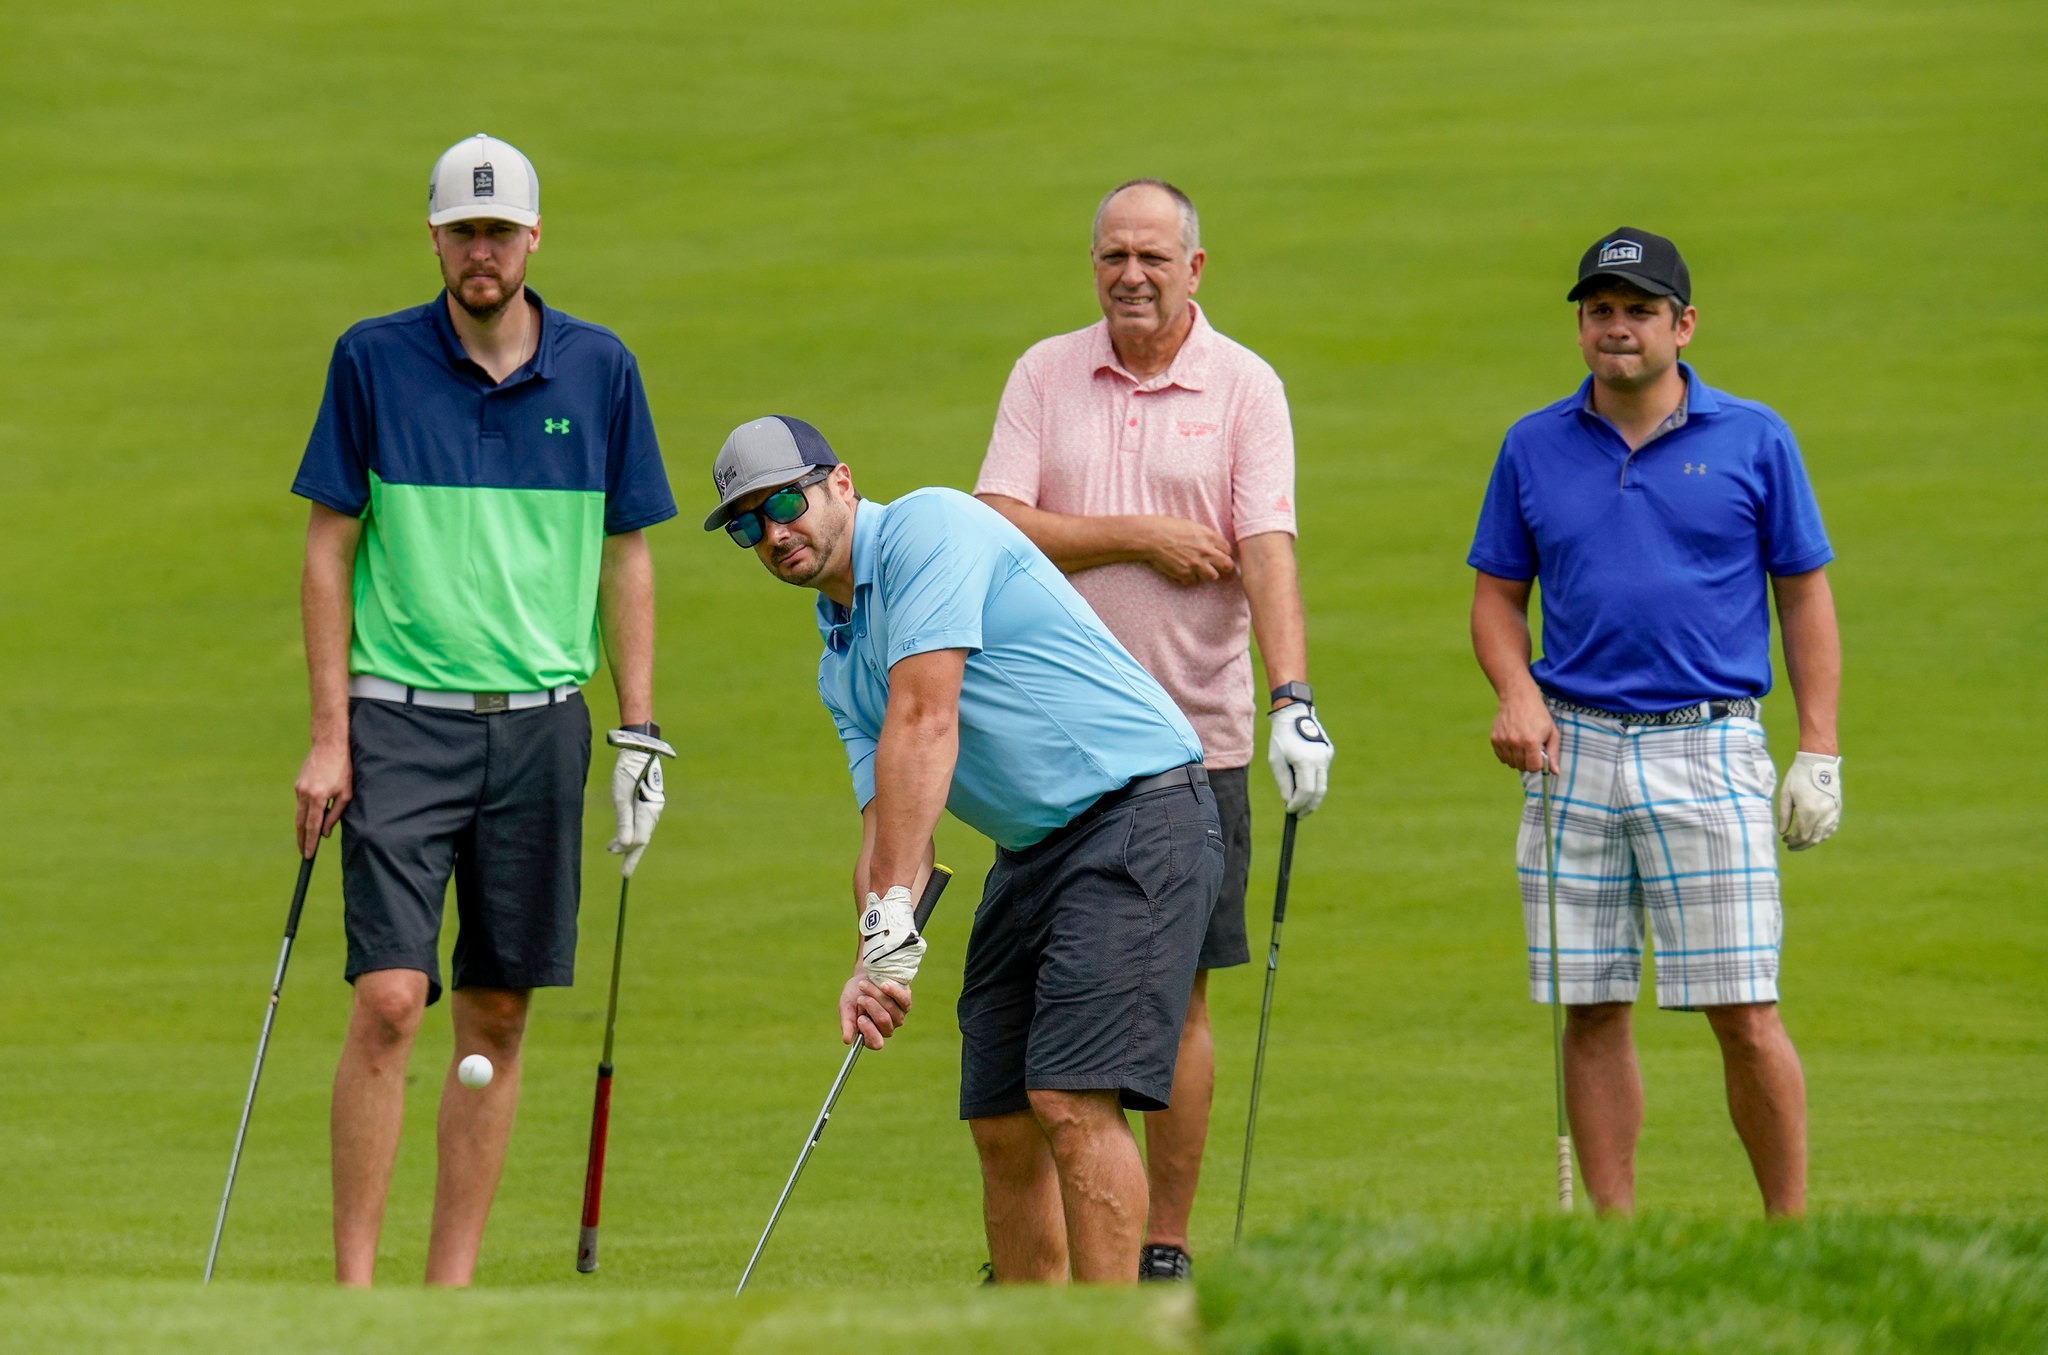 Four men in shorts stand on a golf course. All hold golf clubs.